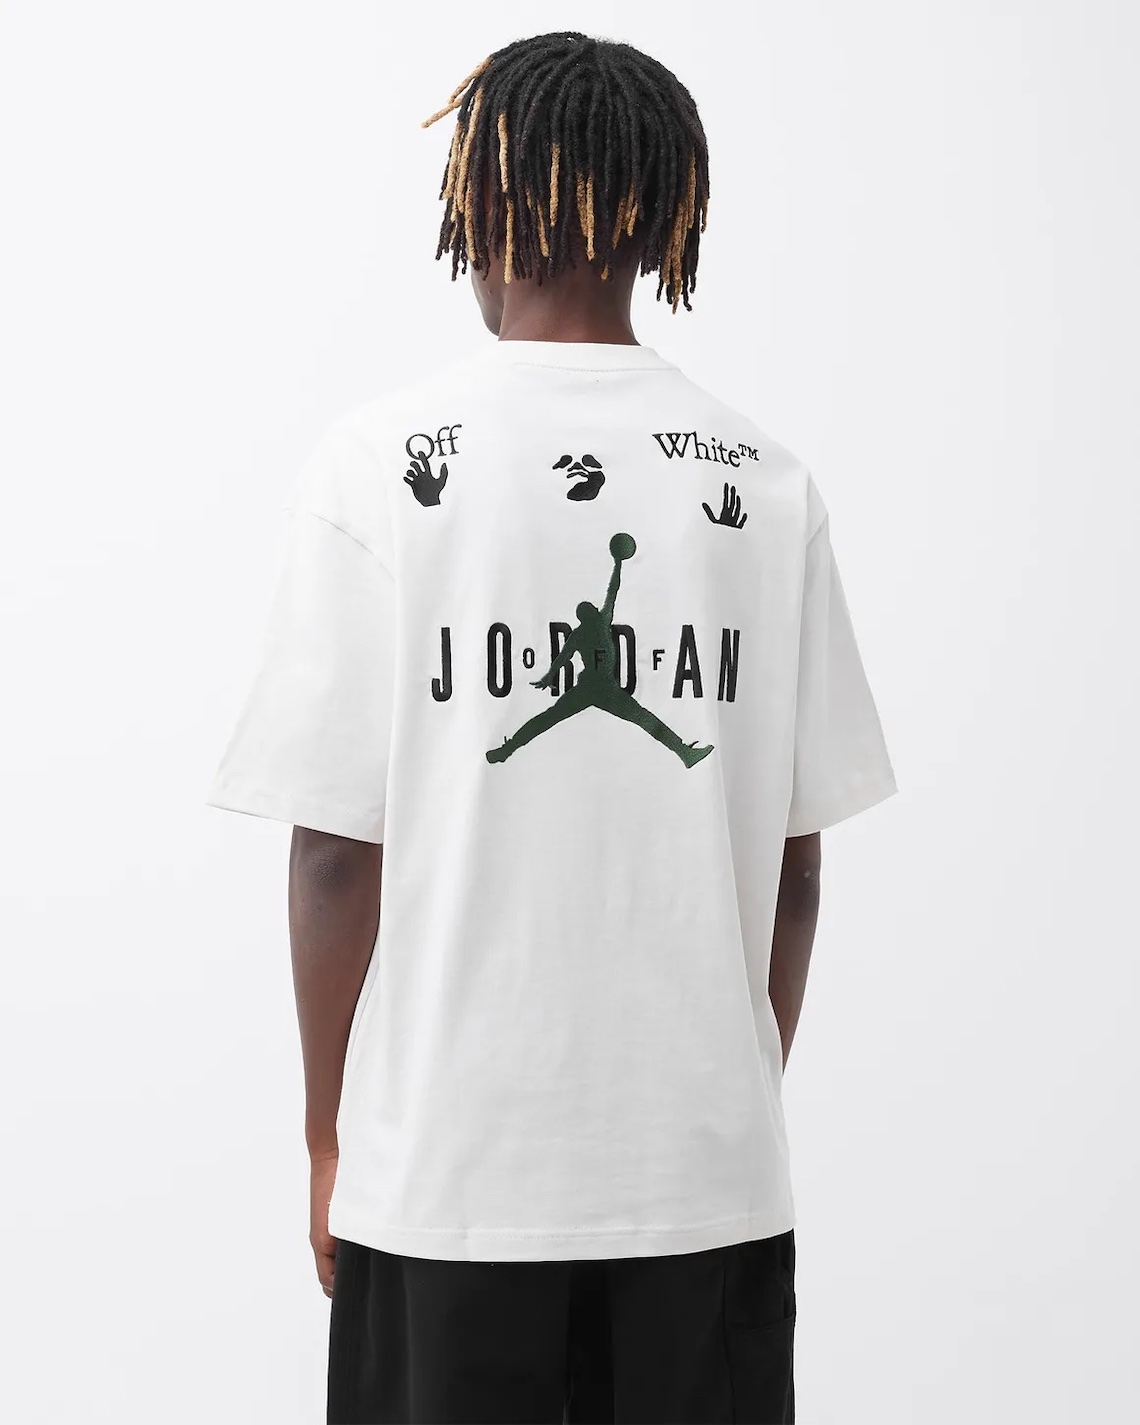 Many dangerous situations the snow's Costume Jordan Off White Tee Shirt Poland, SAVE 39% - aveclumiere.com